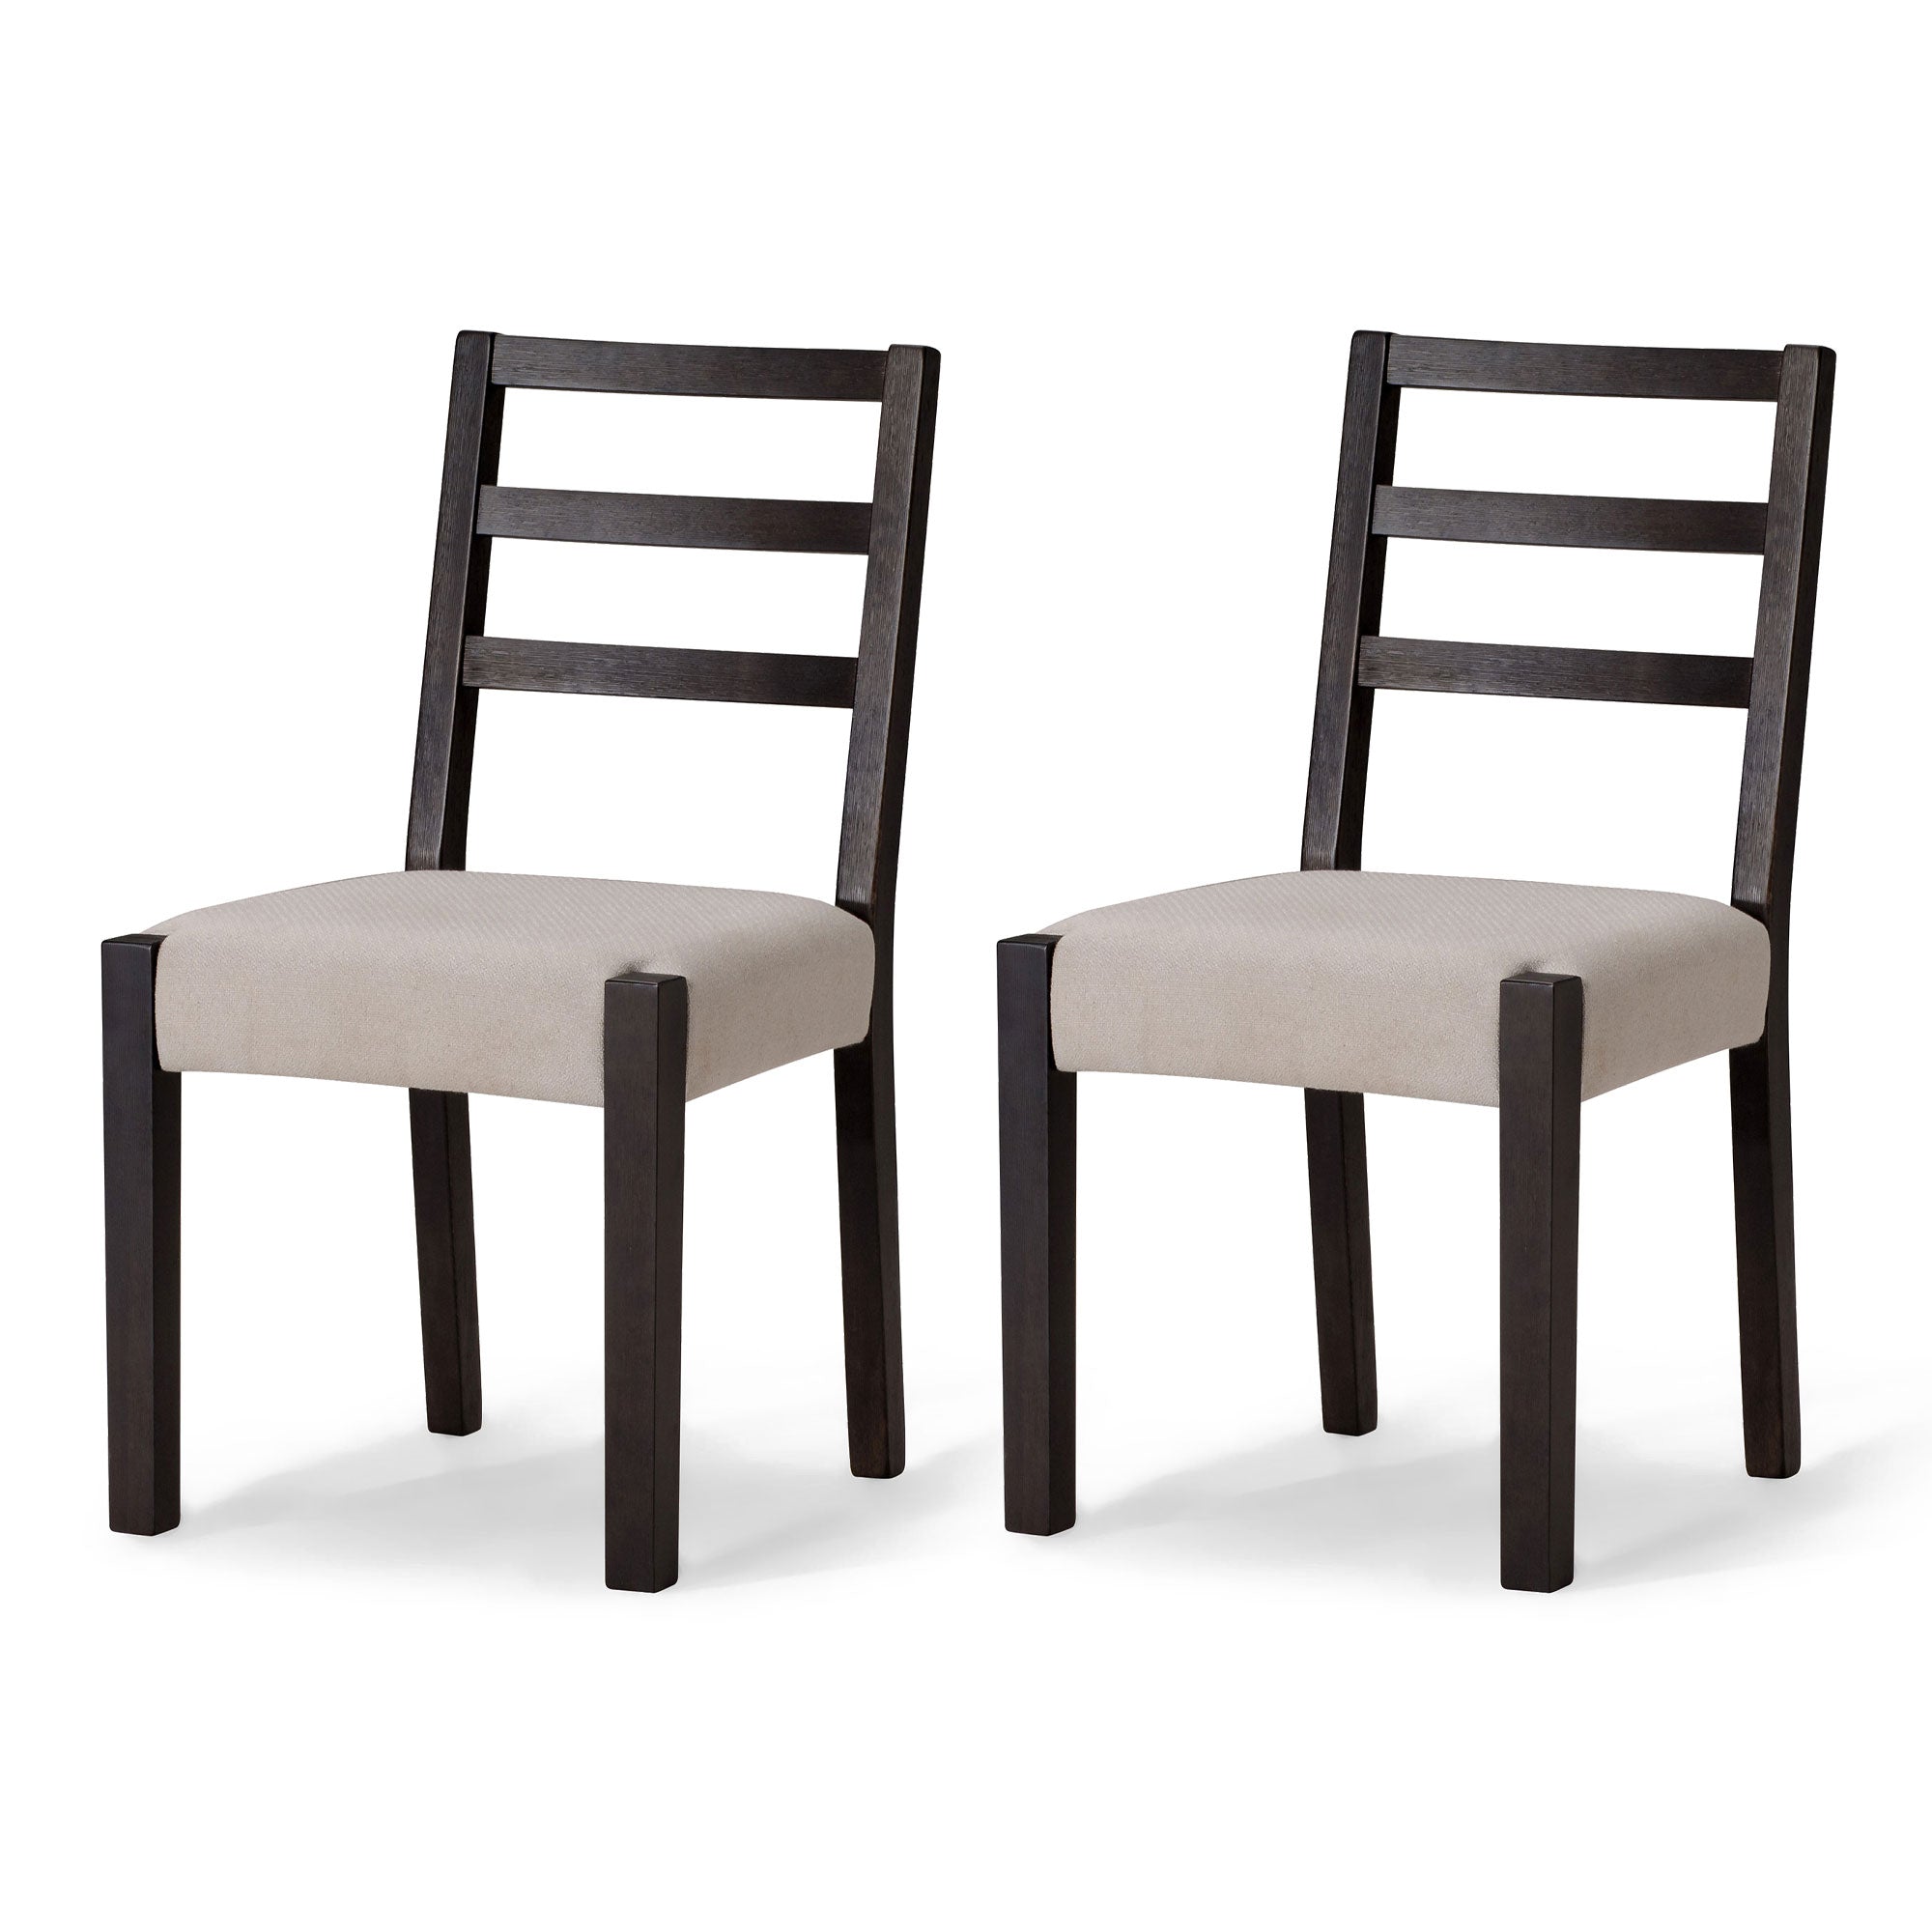 Maven-Lane-Willow-Rustic-Dining-Chair,-Black-With-Dove-Weave-Fabric,-Set-of-2-Kitchen-&-Dining-Room-Chairs